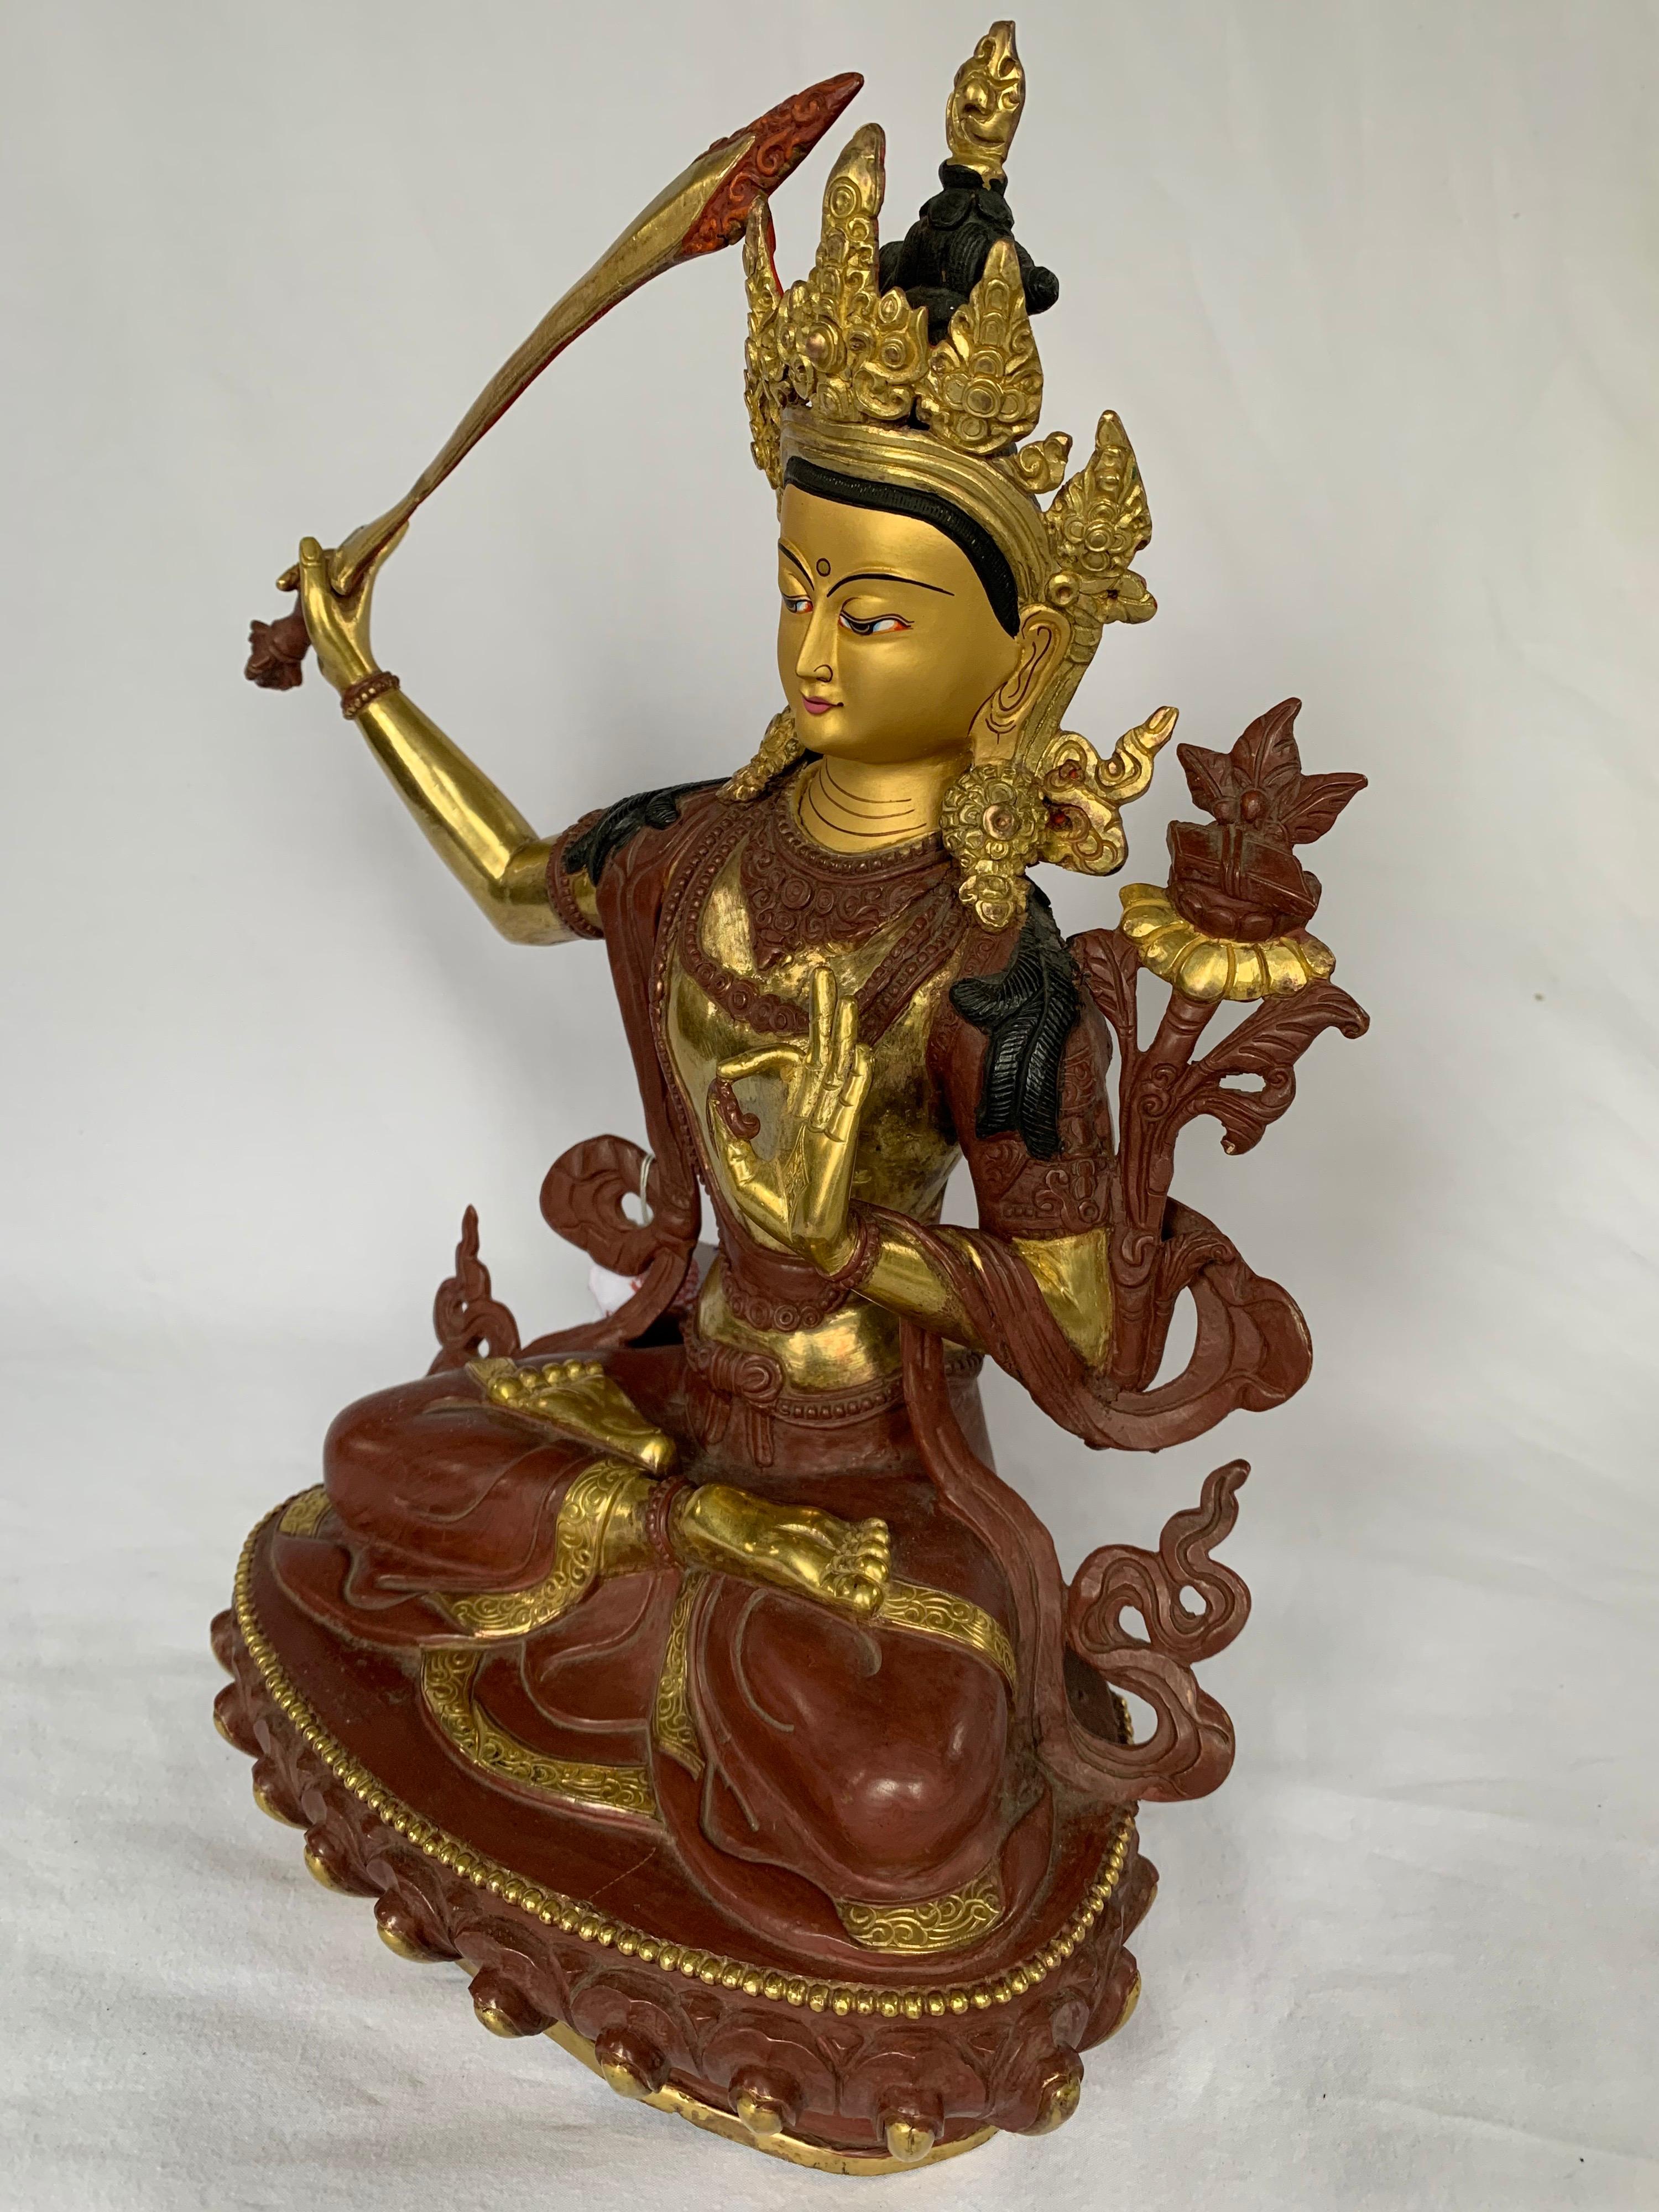 Manjushree Statue 12 Inch with 24K Gold Handcrafted by Lost Wax Process - Sculpture by Unknown